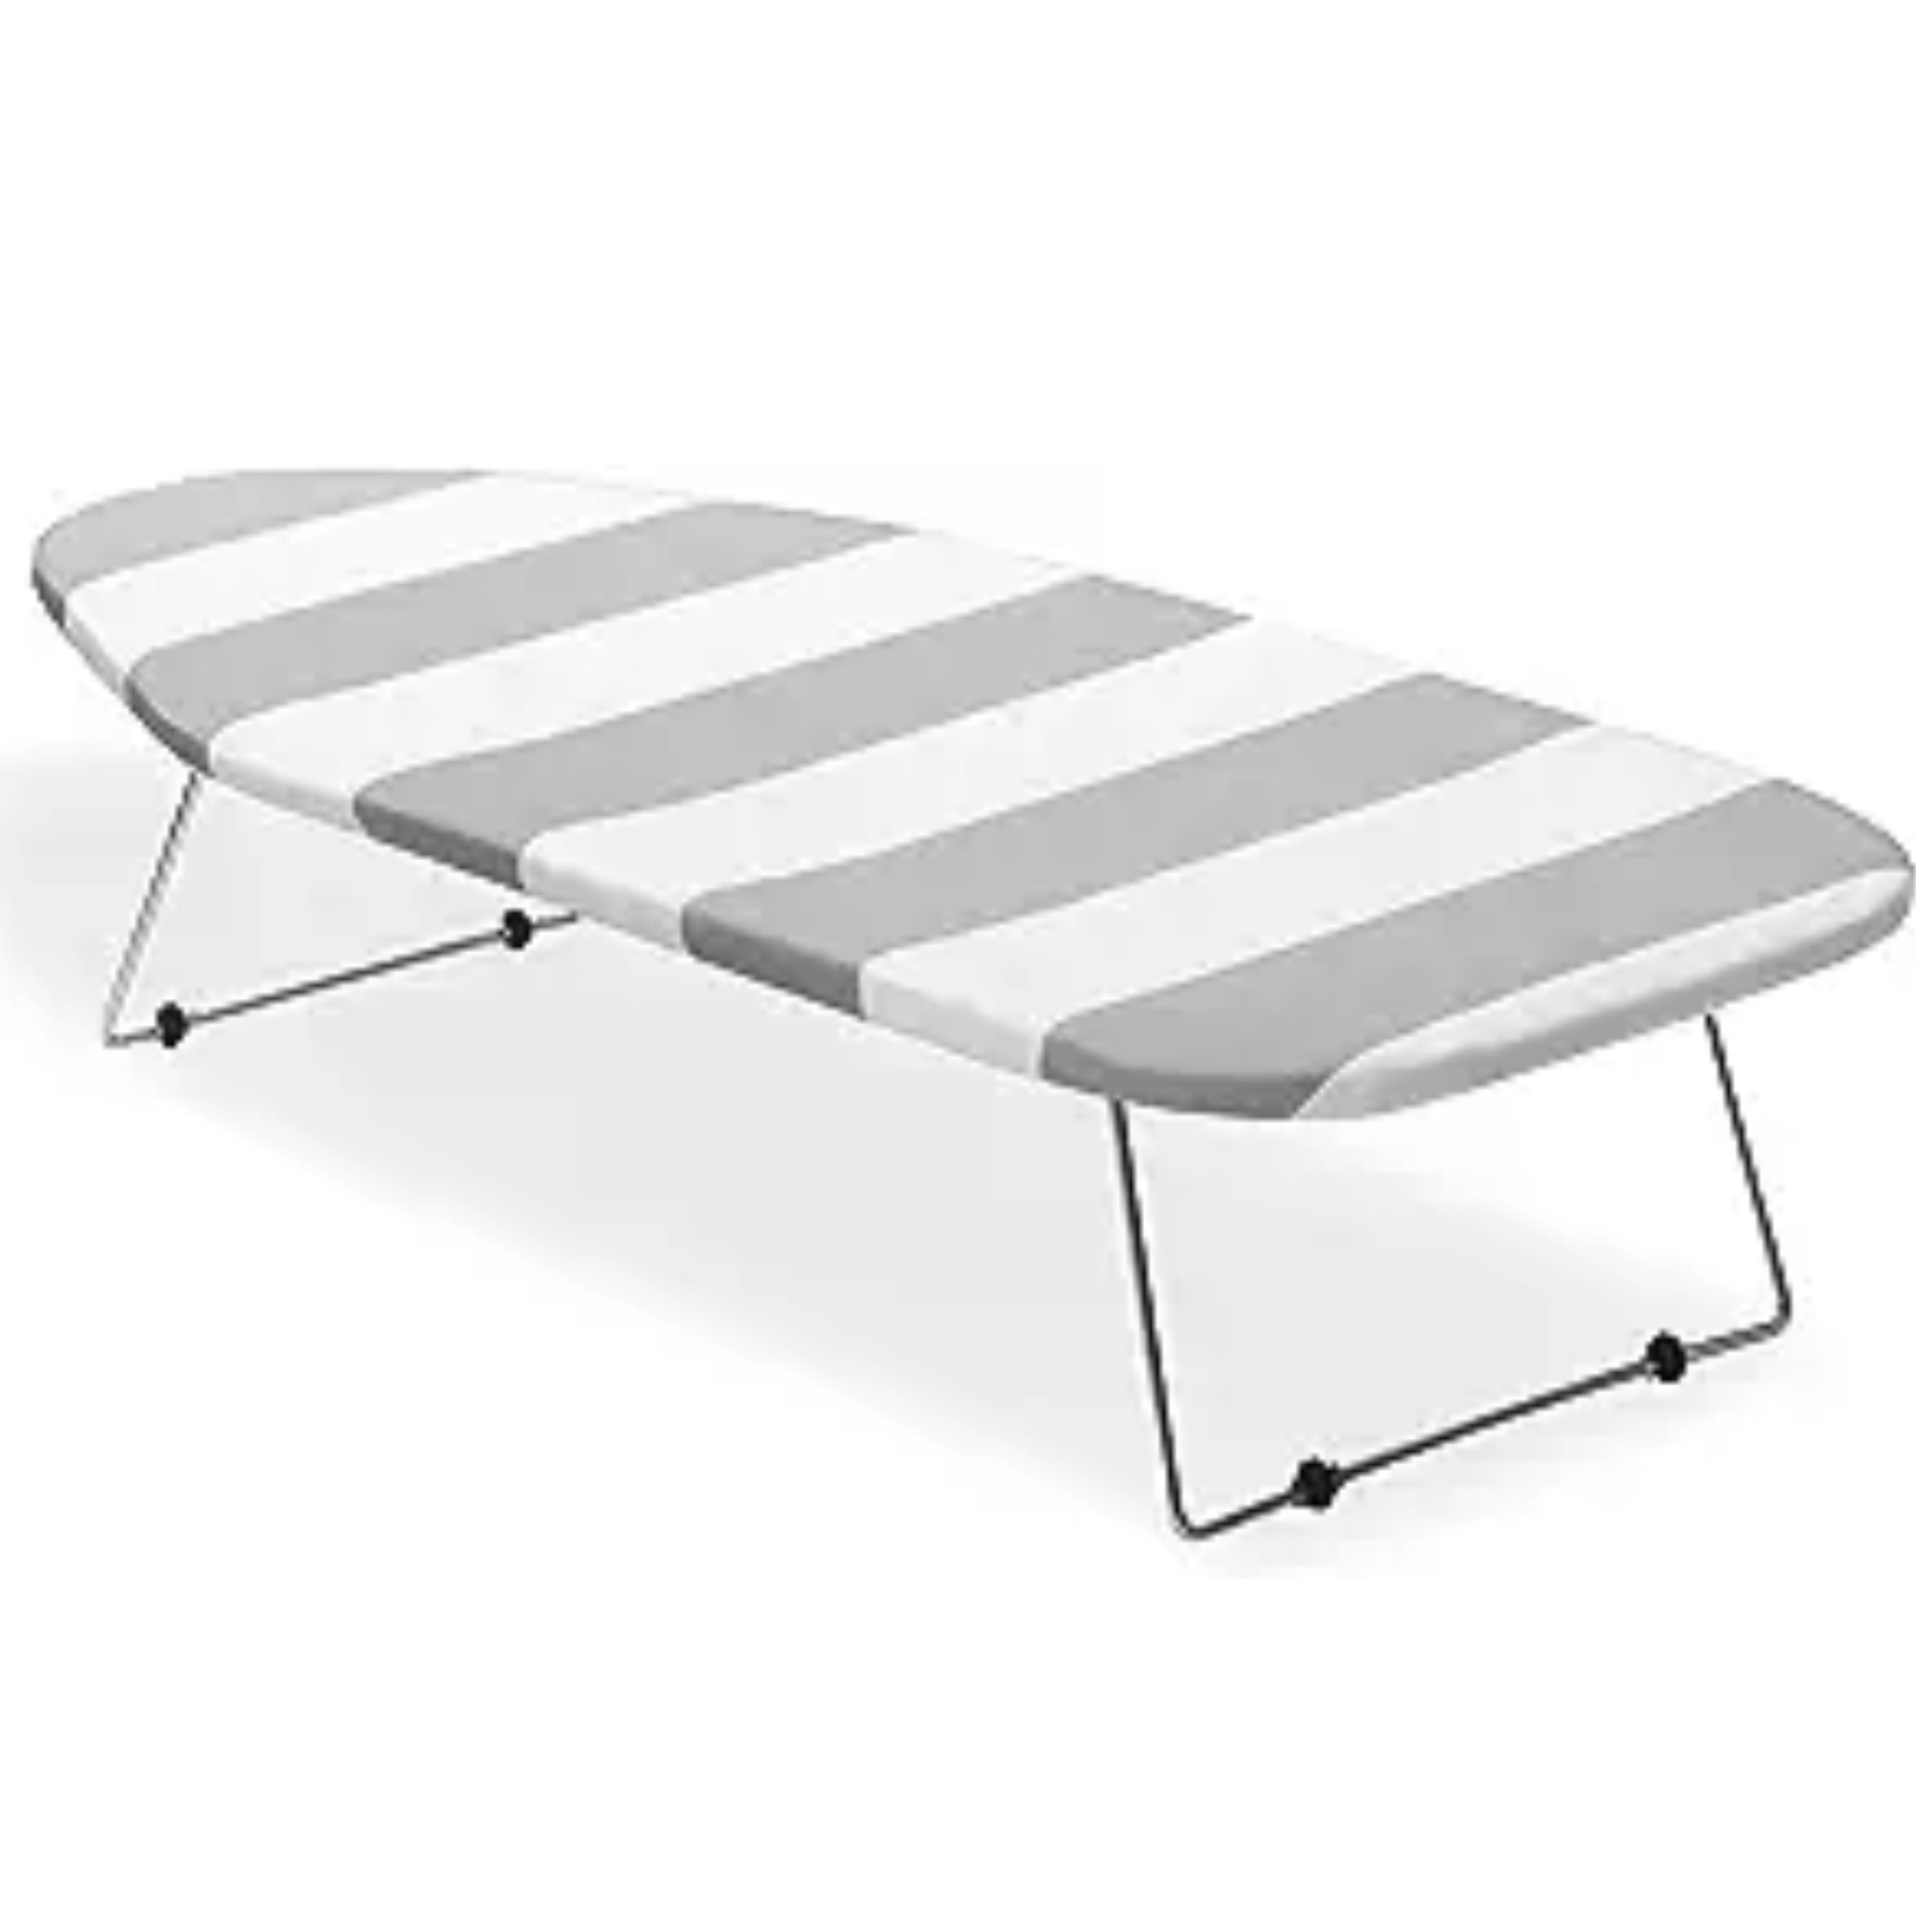 Tabletop Ironing Board With Scorch Resistant Stripe Cover – 12" x 29" – UPPER EAST SIDE DELIVERY ONLY